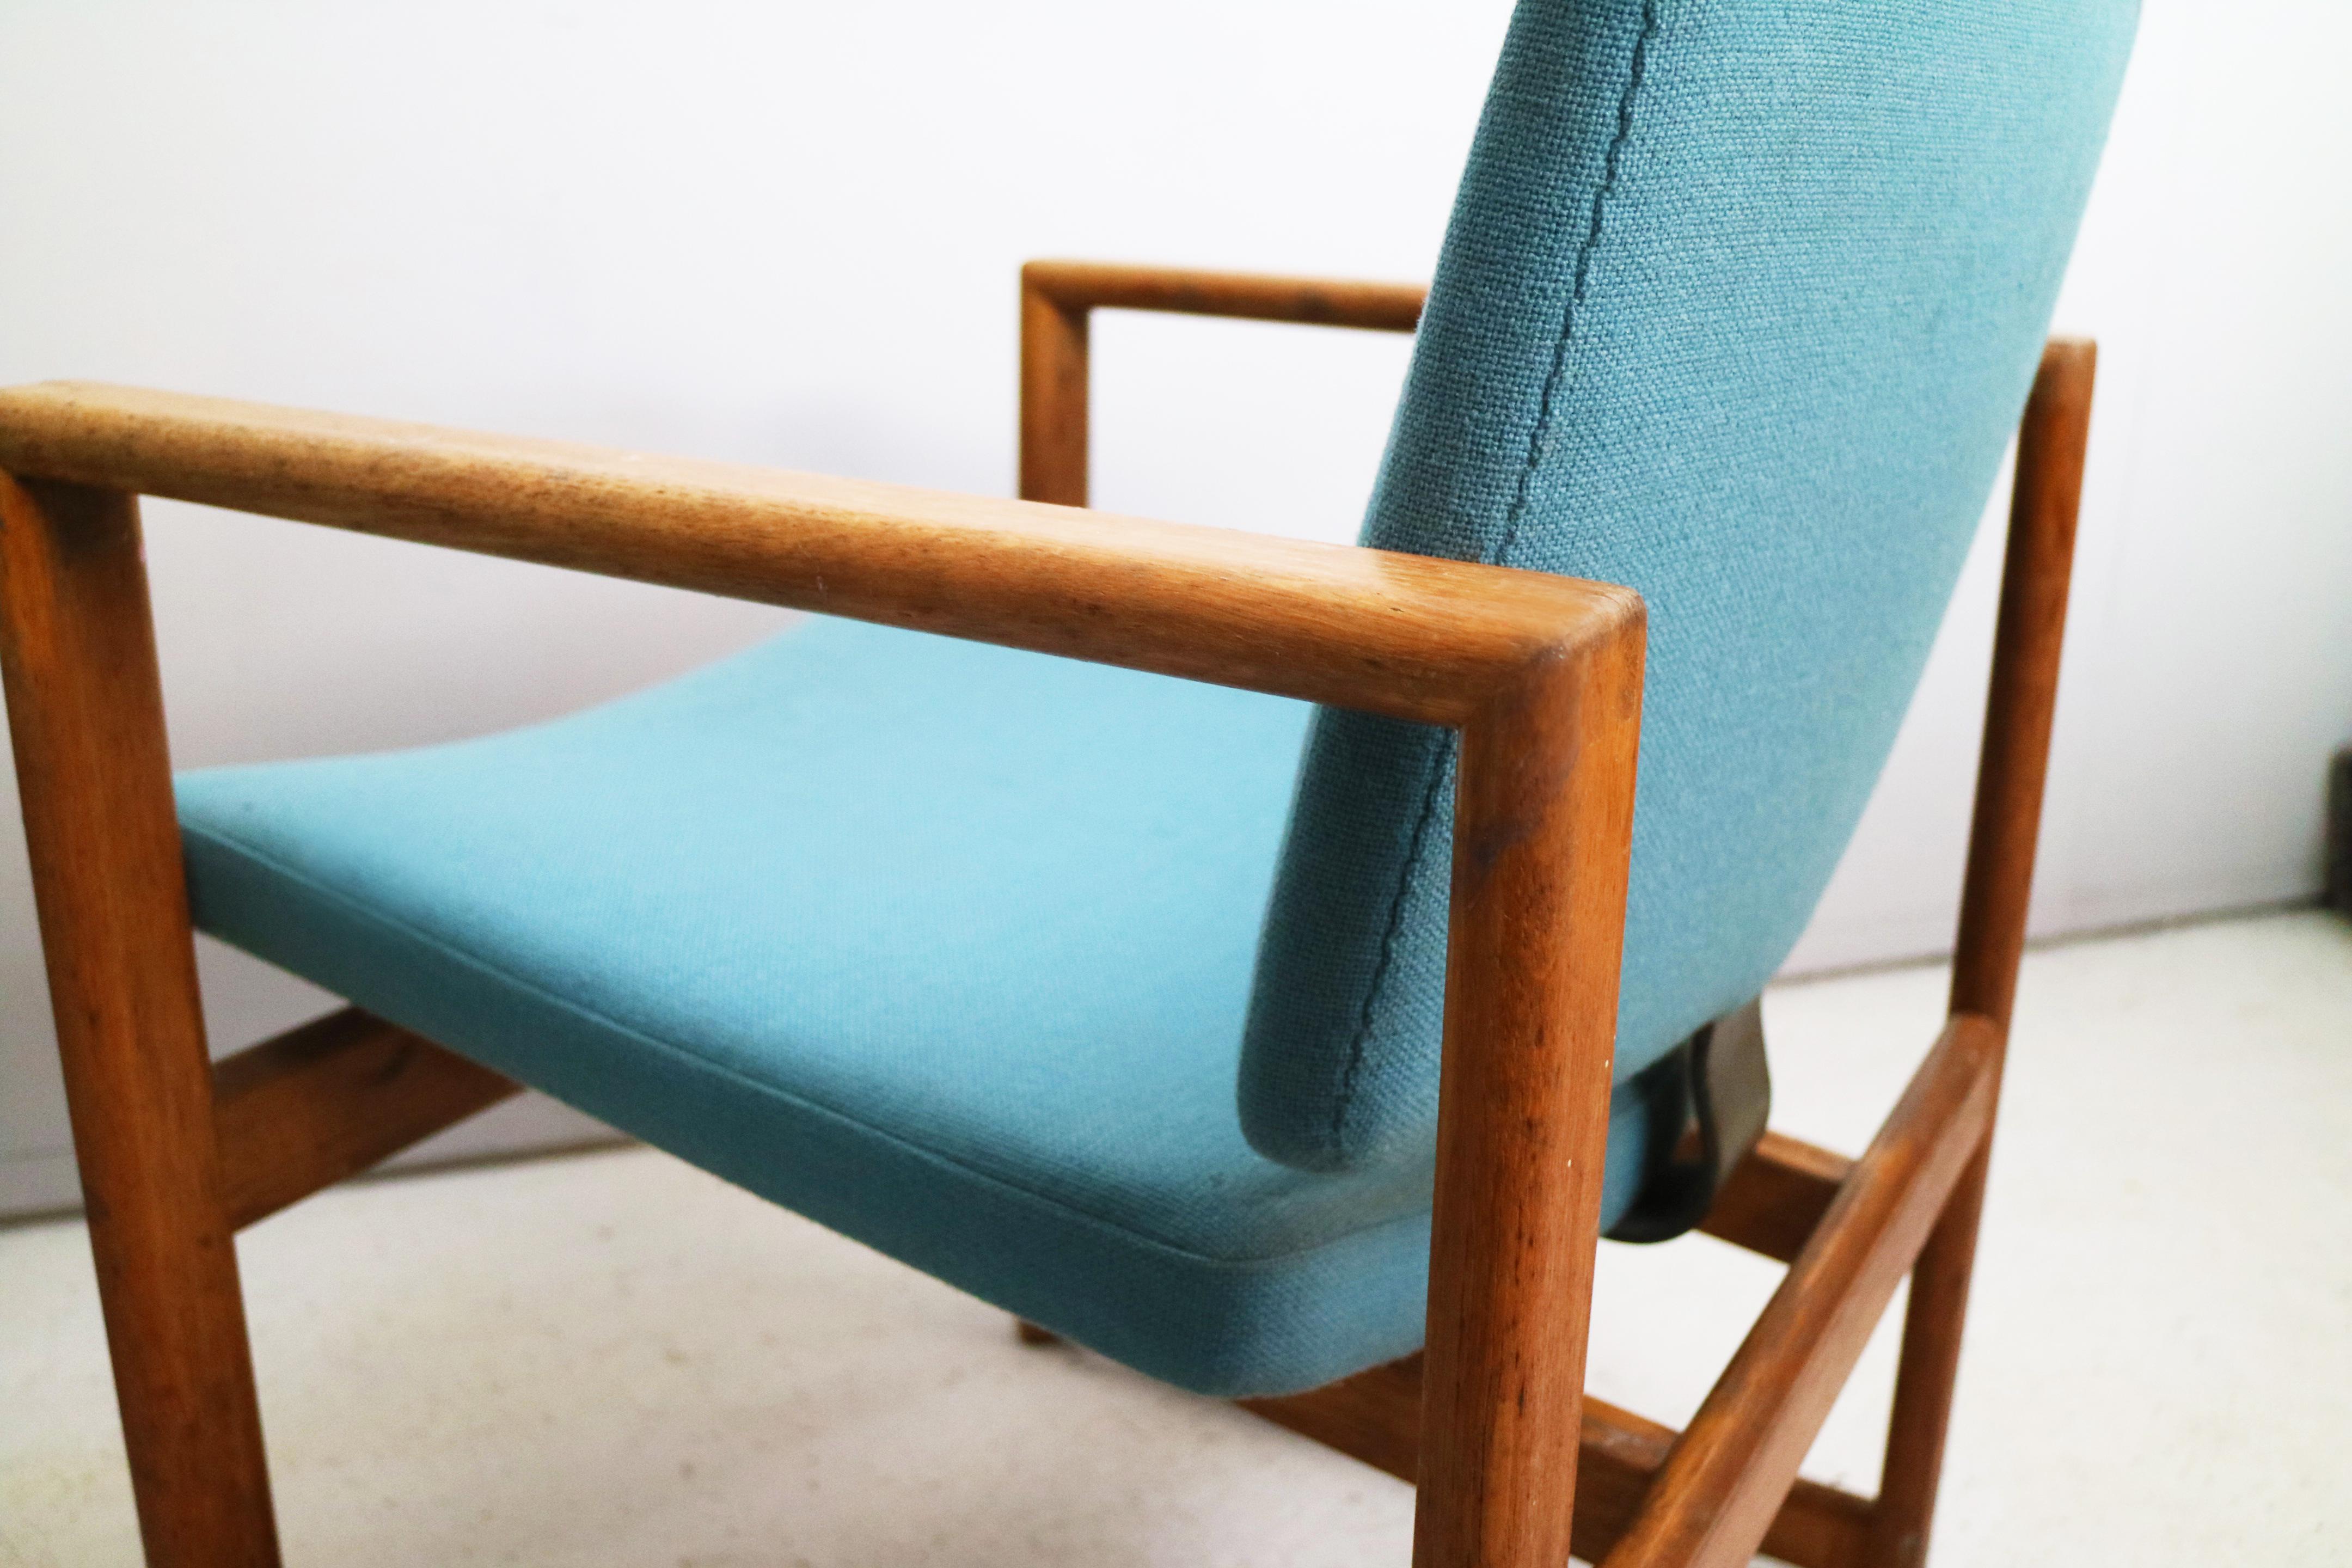 These chairs have geometrically shaped solid oak frames with light blue original upholstery. The back has a single sprung steel support.

The price listed is for all four chairs
Happy to split the set into pairs.
   